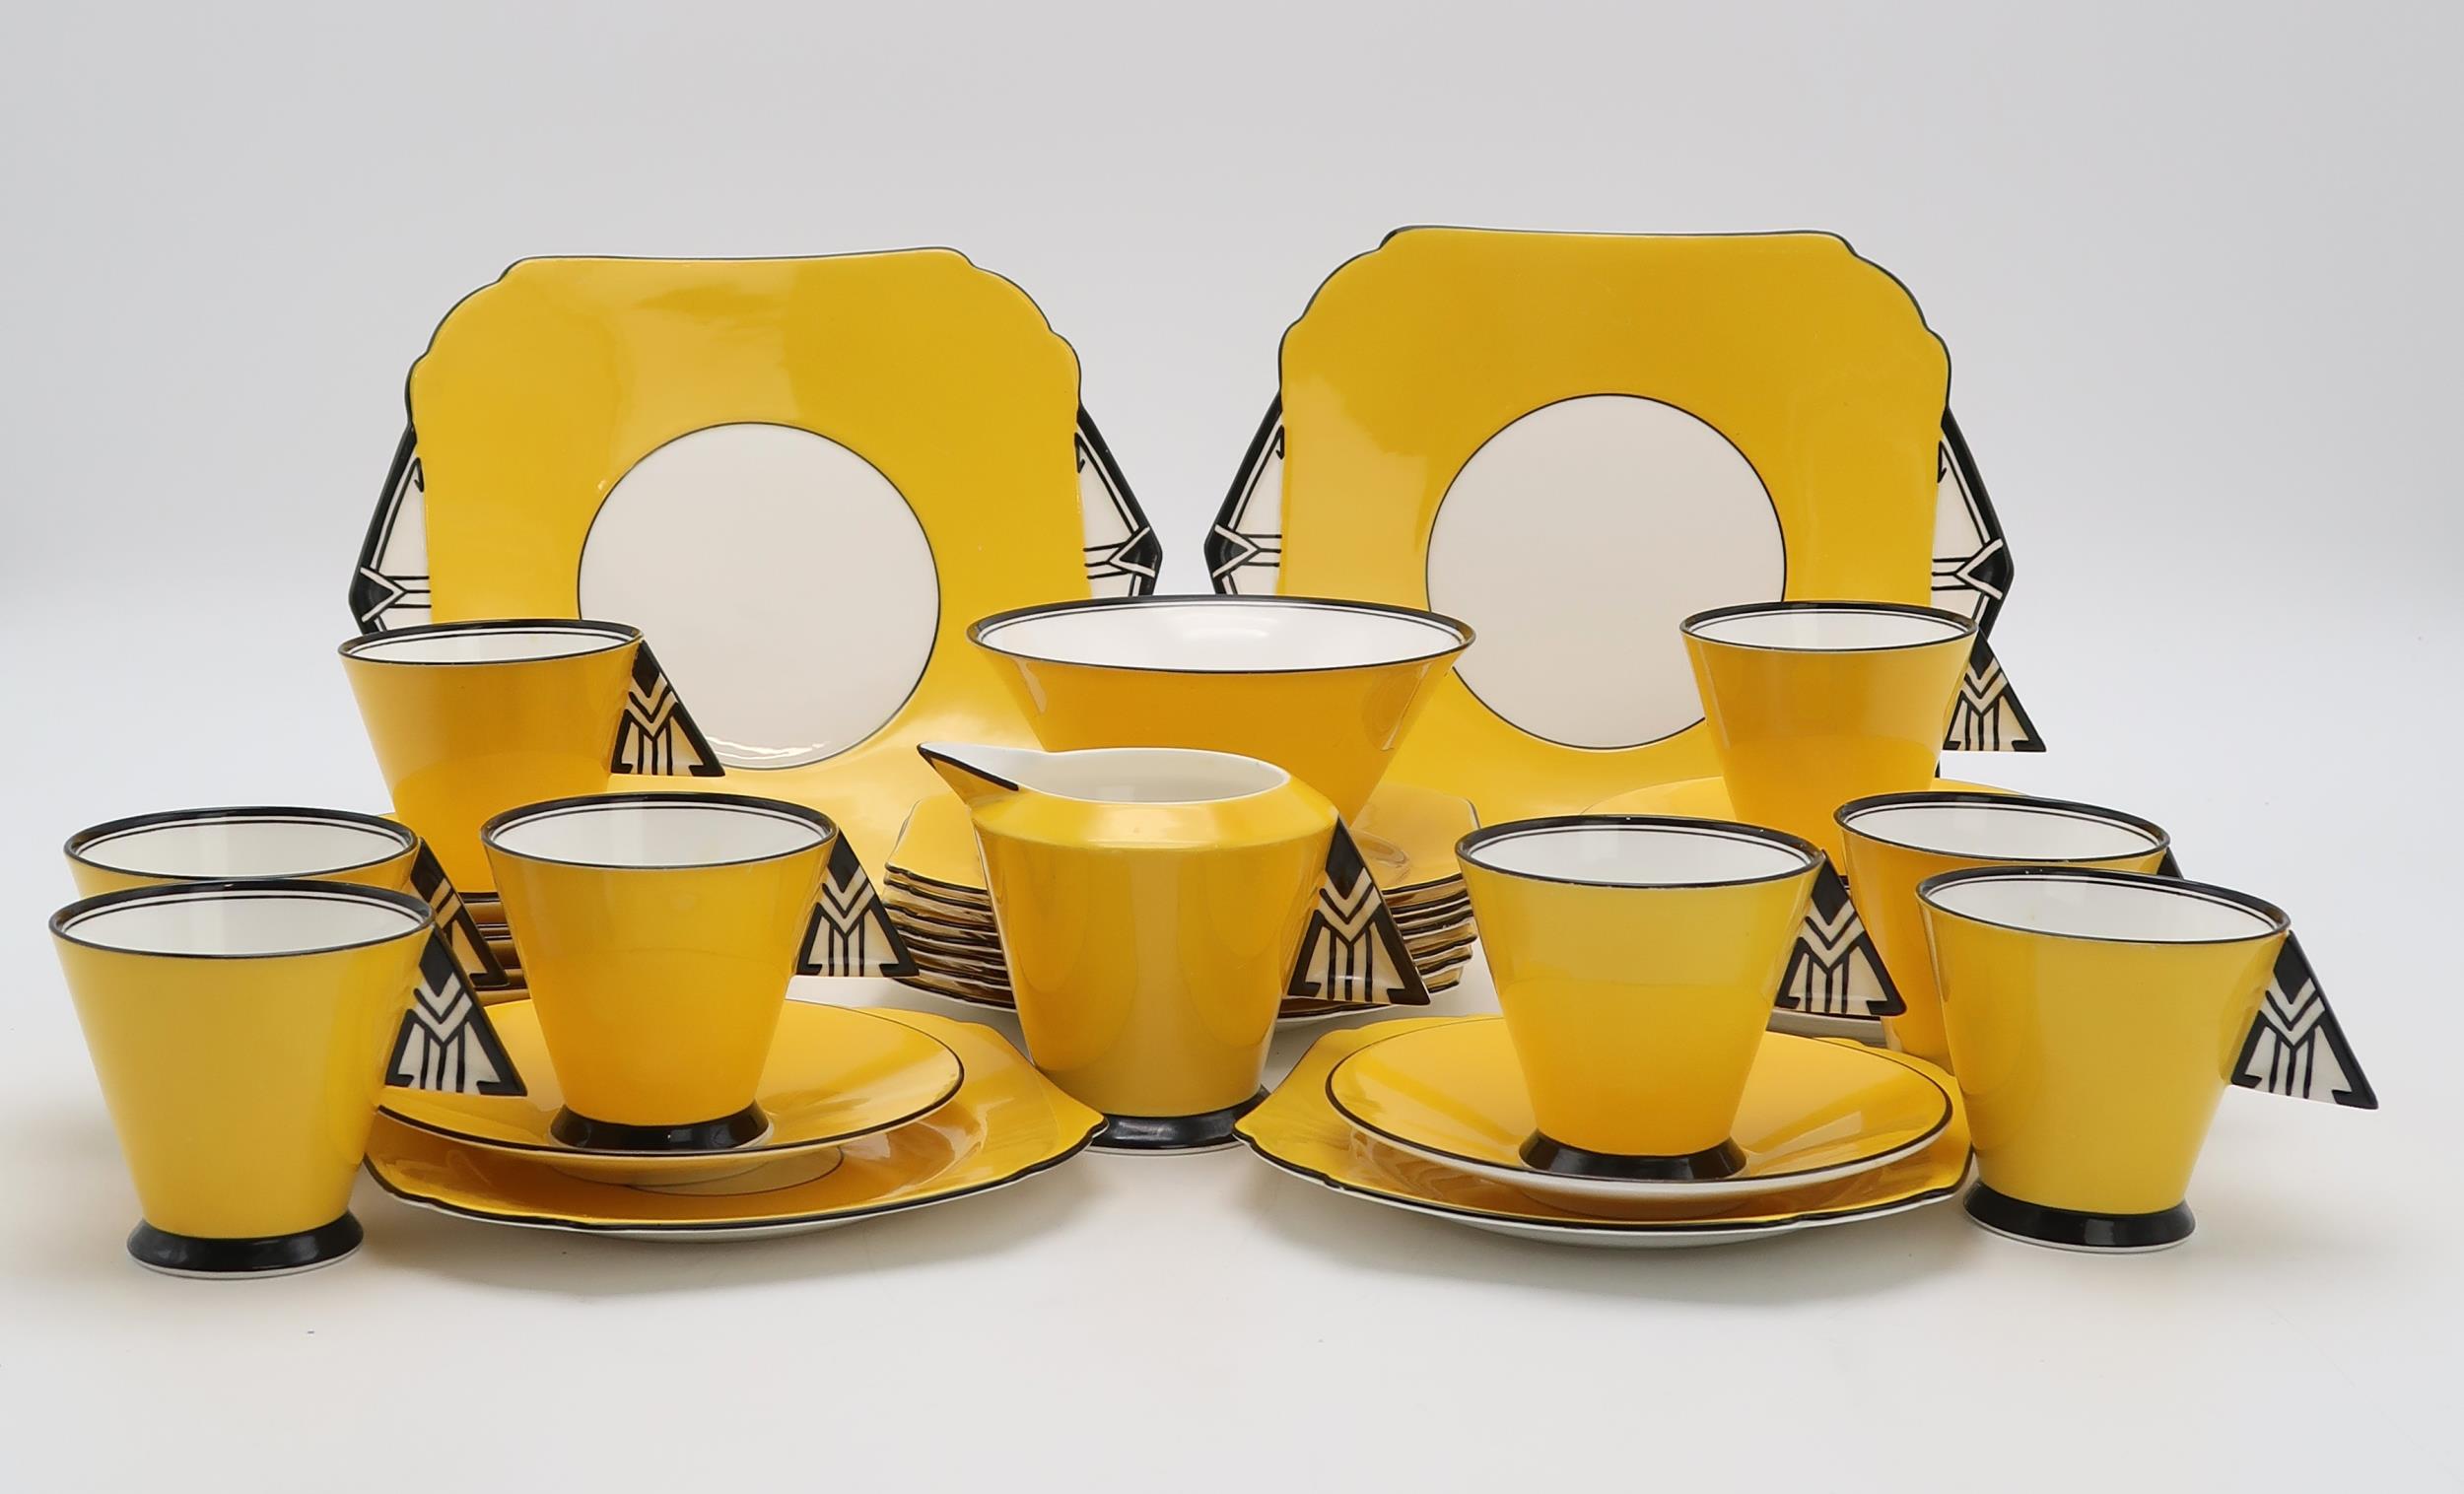 ERIC SLATER FOR SHELLEY - A PORCELAIN 1930'S TEA SERVICE in the Vogue shape decorated in the '